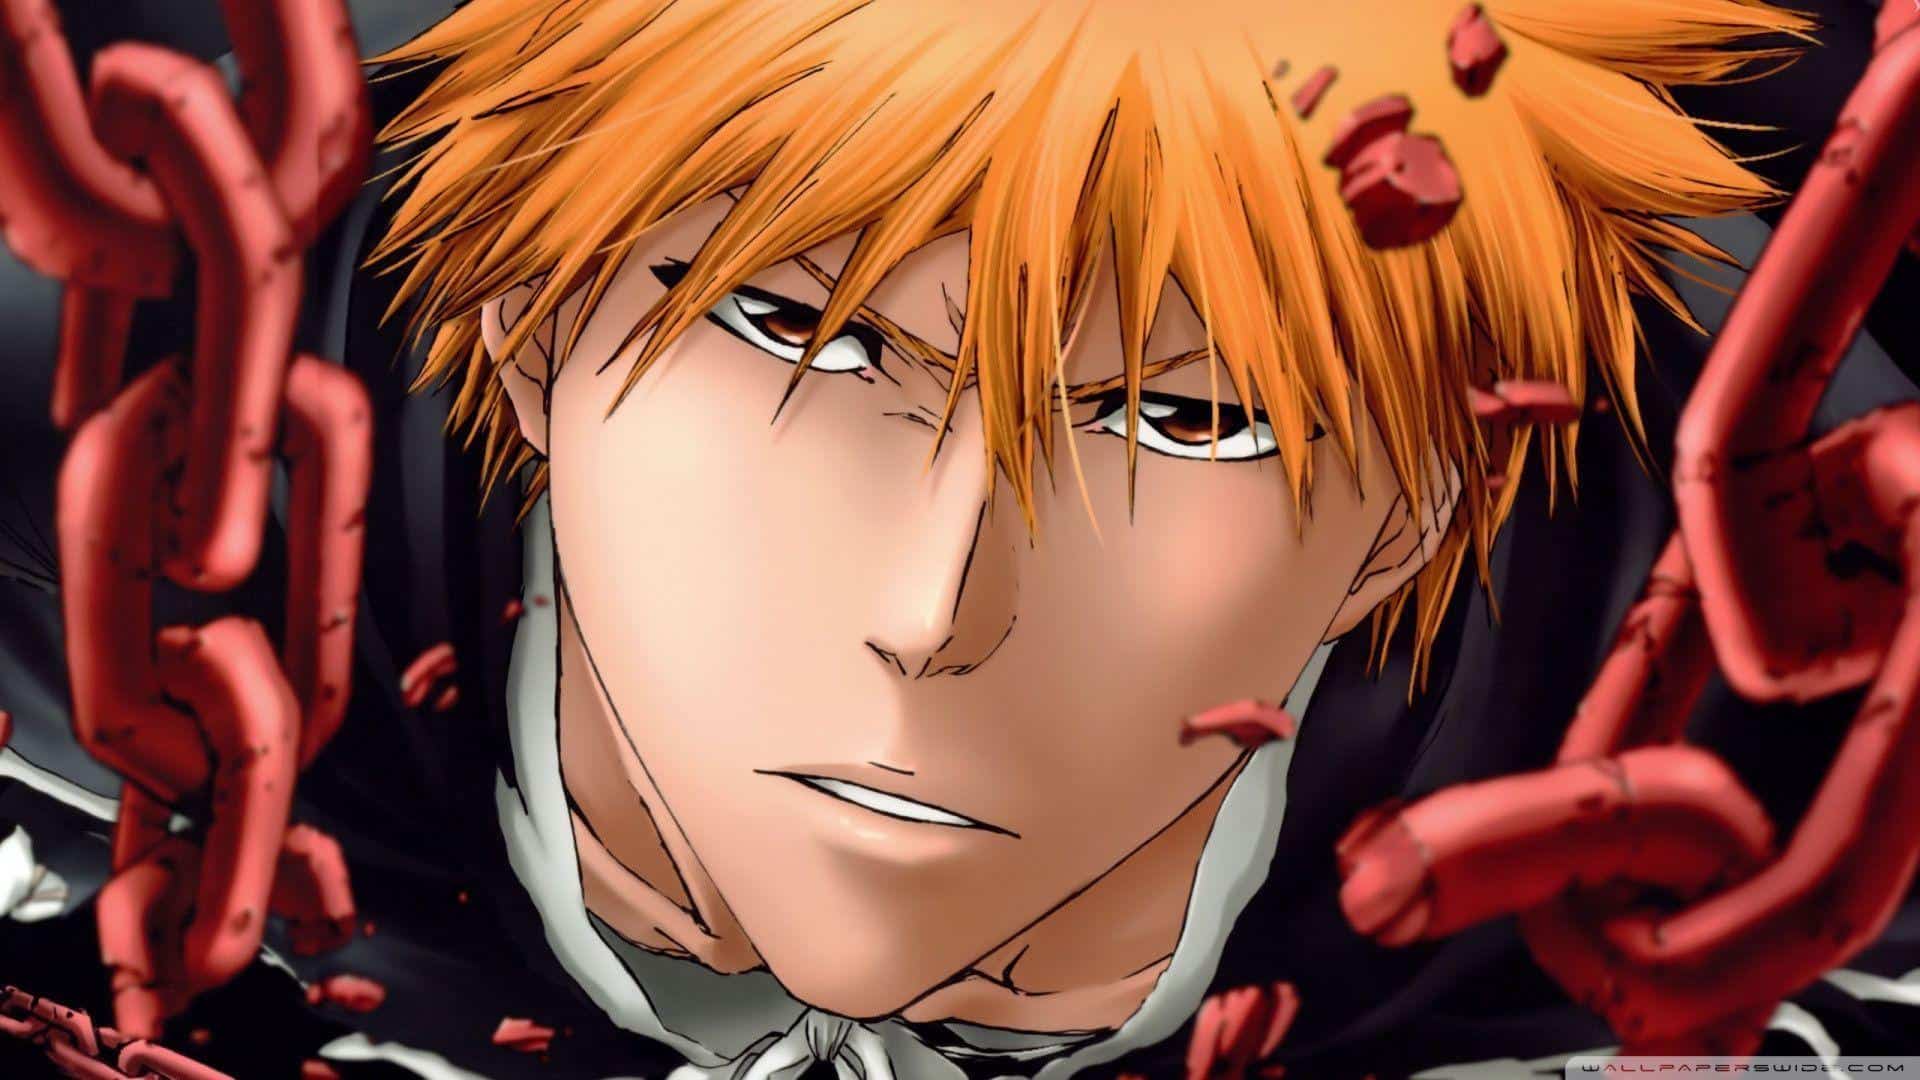 Trailer: 'Bleach' anime to return after decade-long absence with  'Thousand-Year Blood War' arc